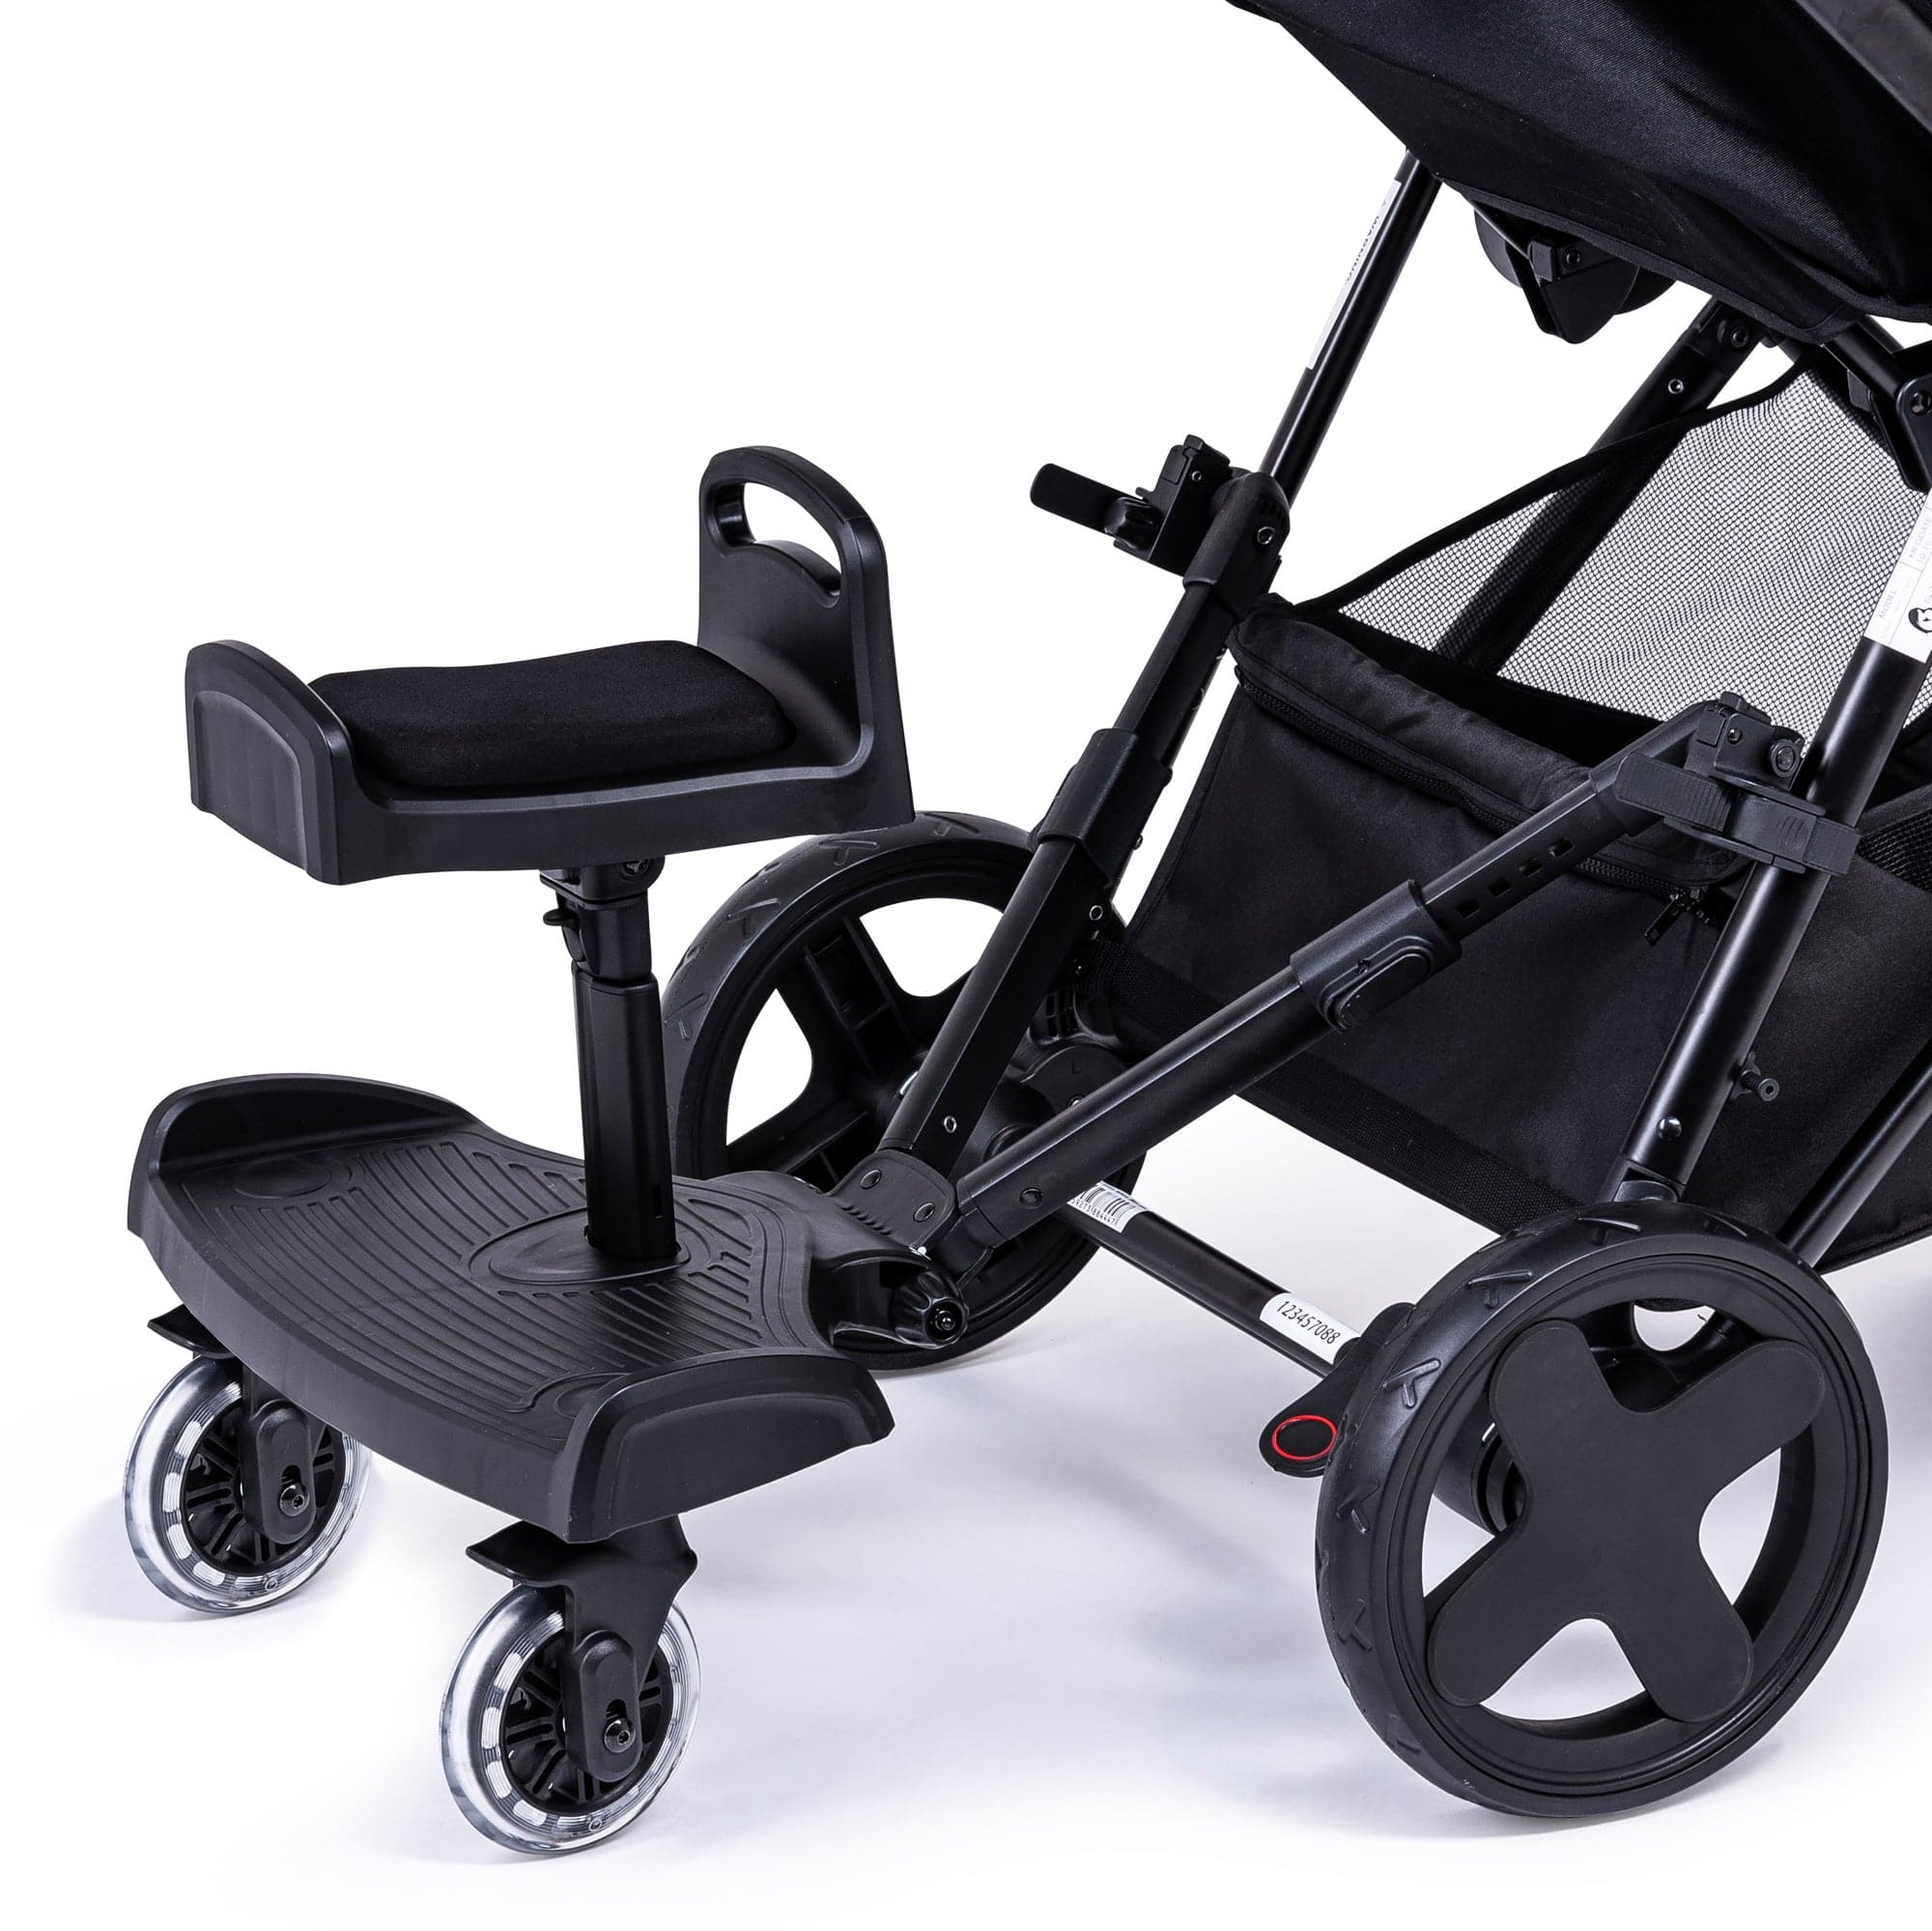 Ride On Board with Saddle Compatible with Uppababy - For Your Little One